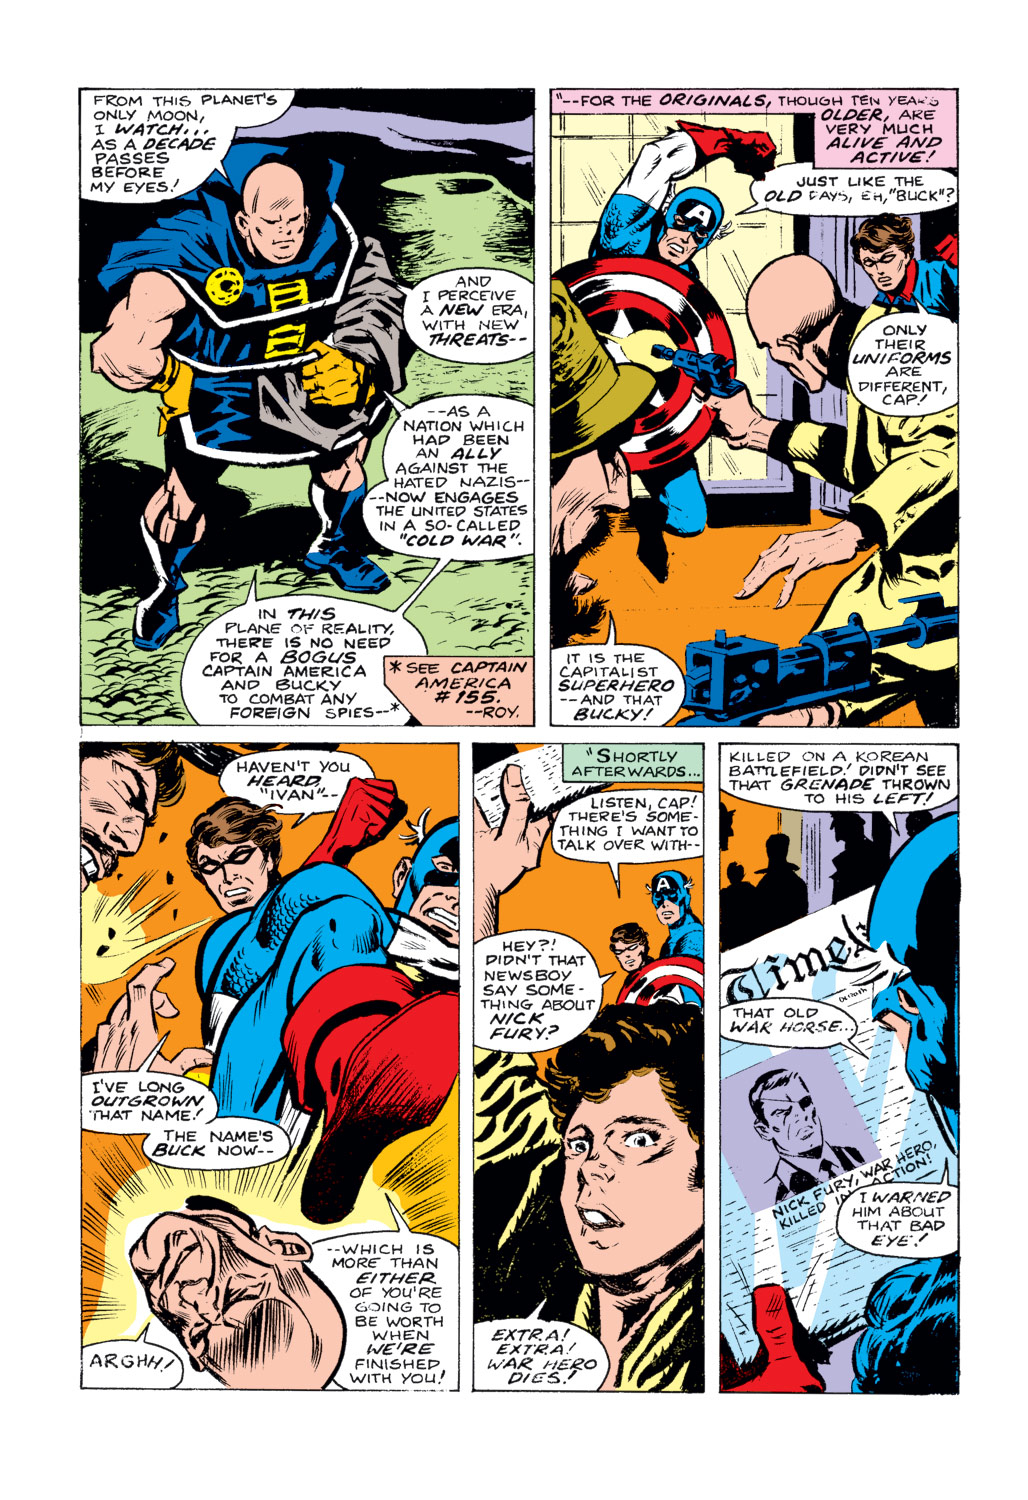 What If? (1977) issue 5 - Captain America hadn't vanished during World War Two - Page 11